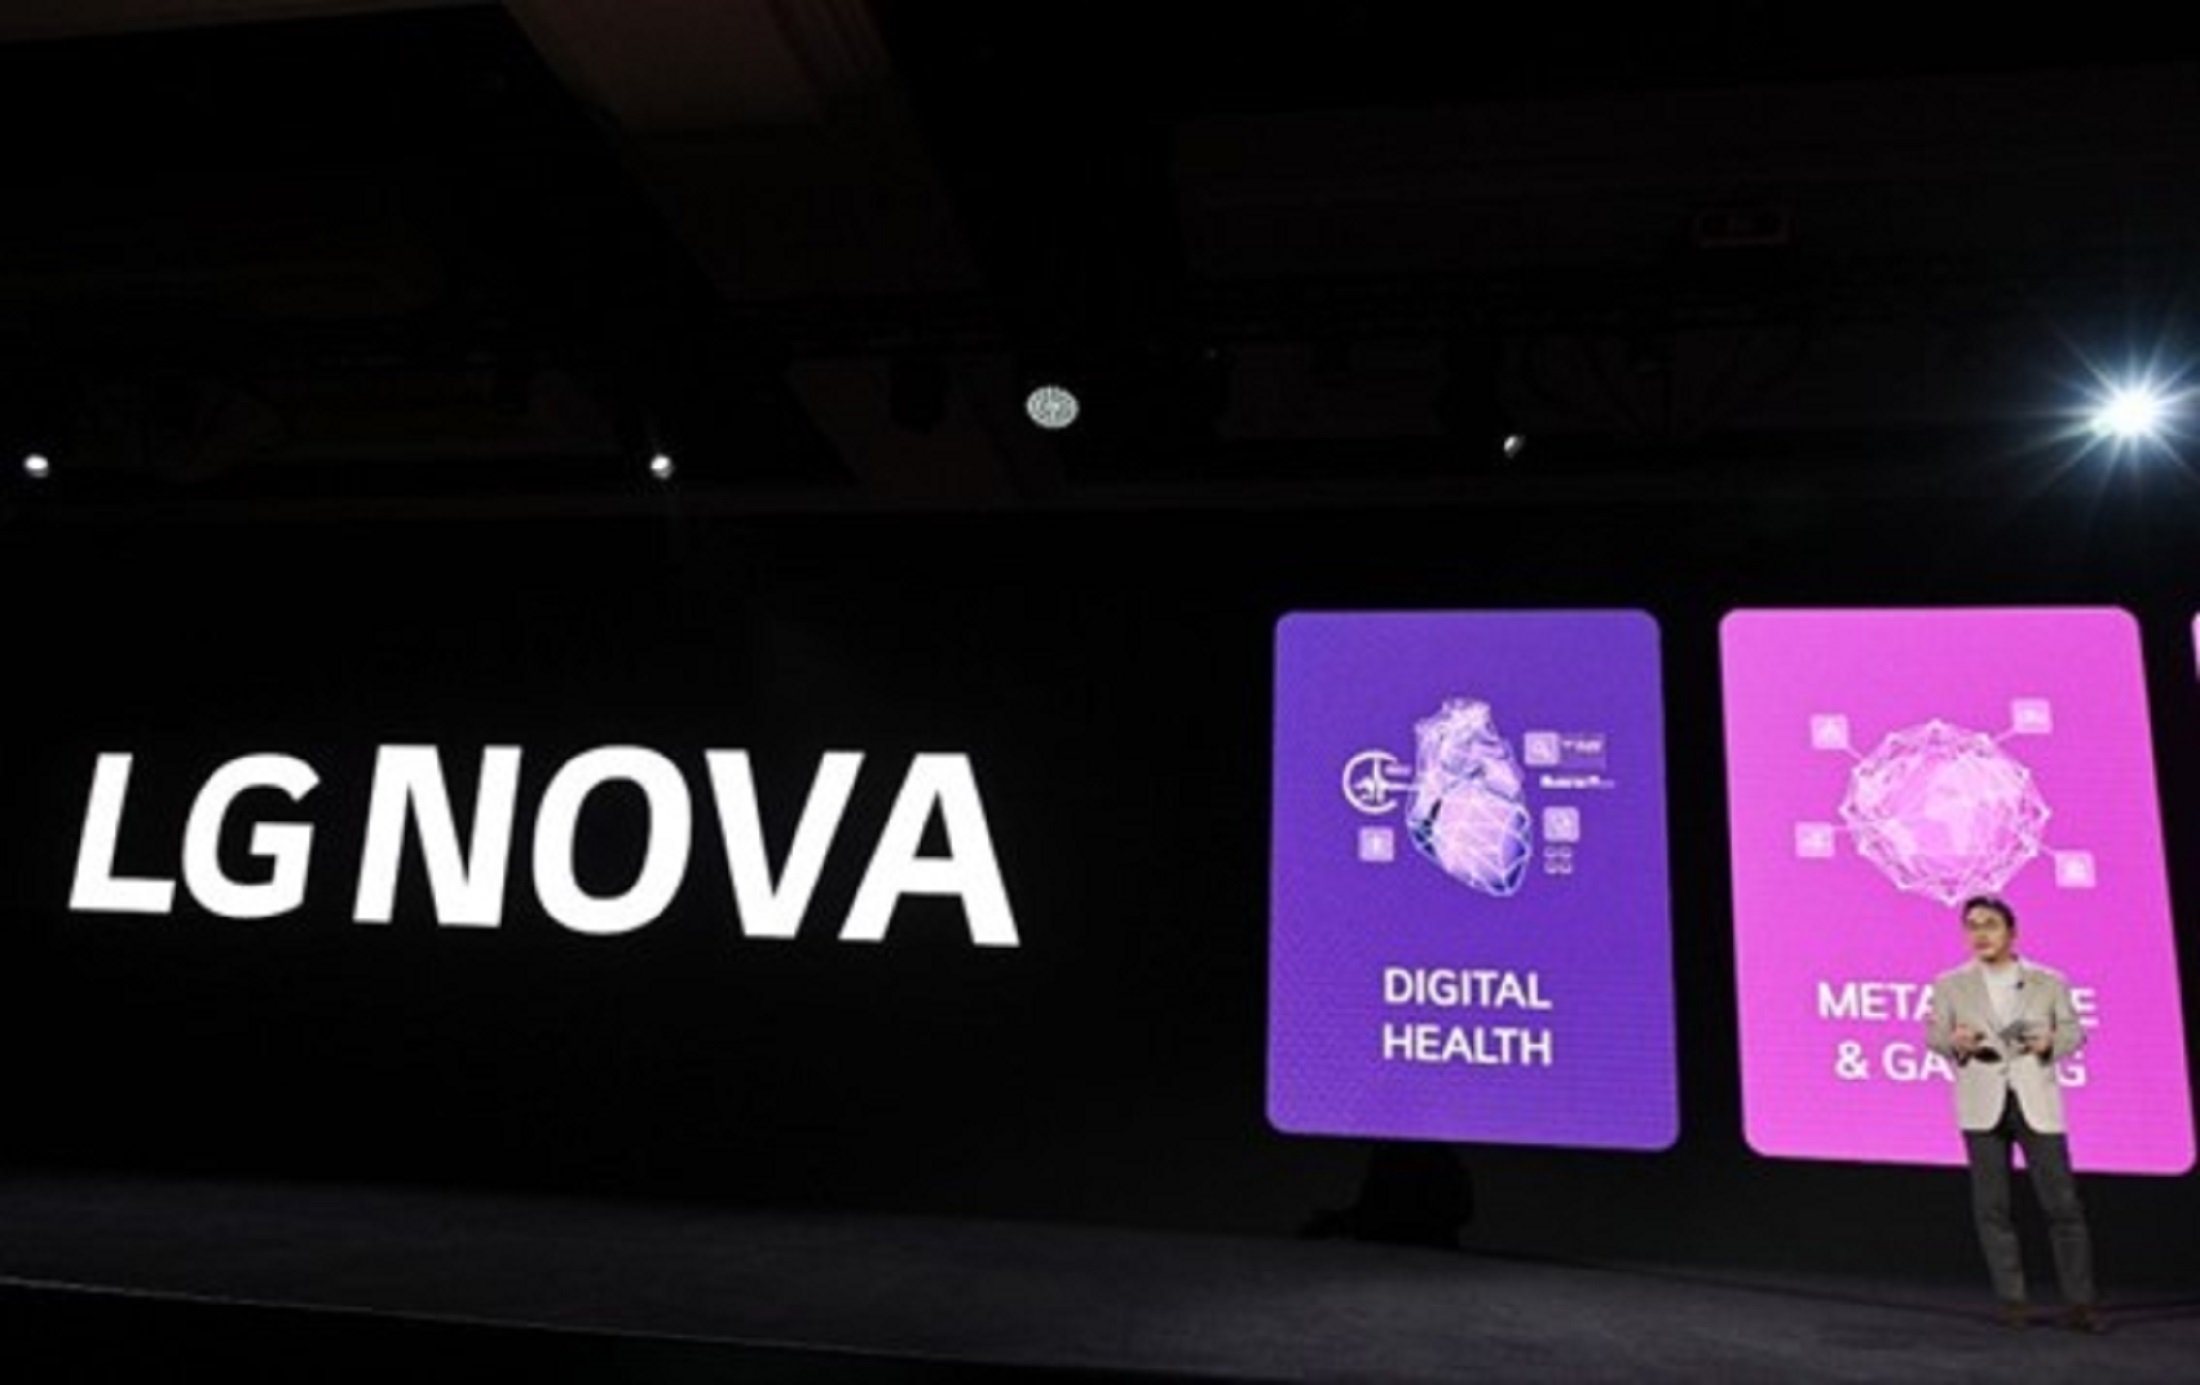 LG NOVA: Building New Ventures to Accomplish Mission for the Future